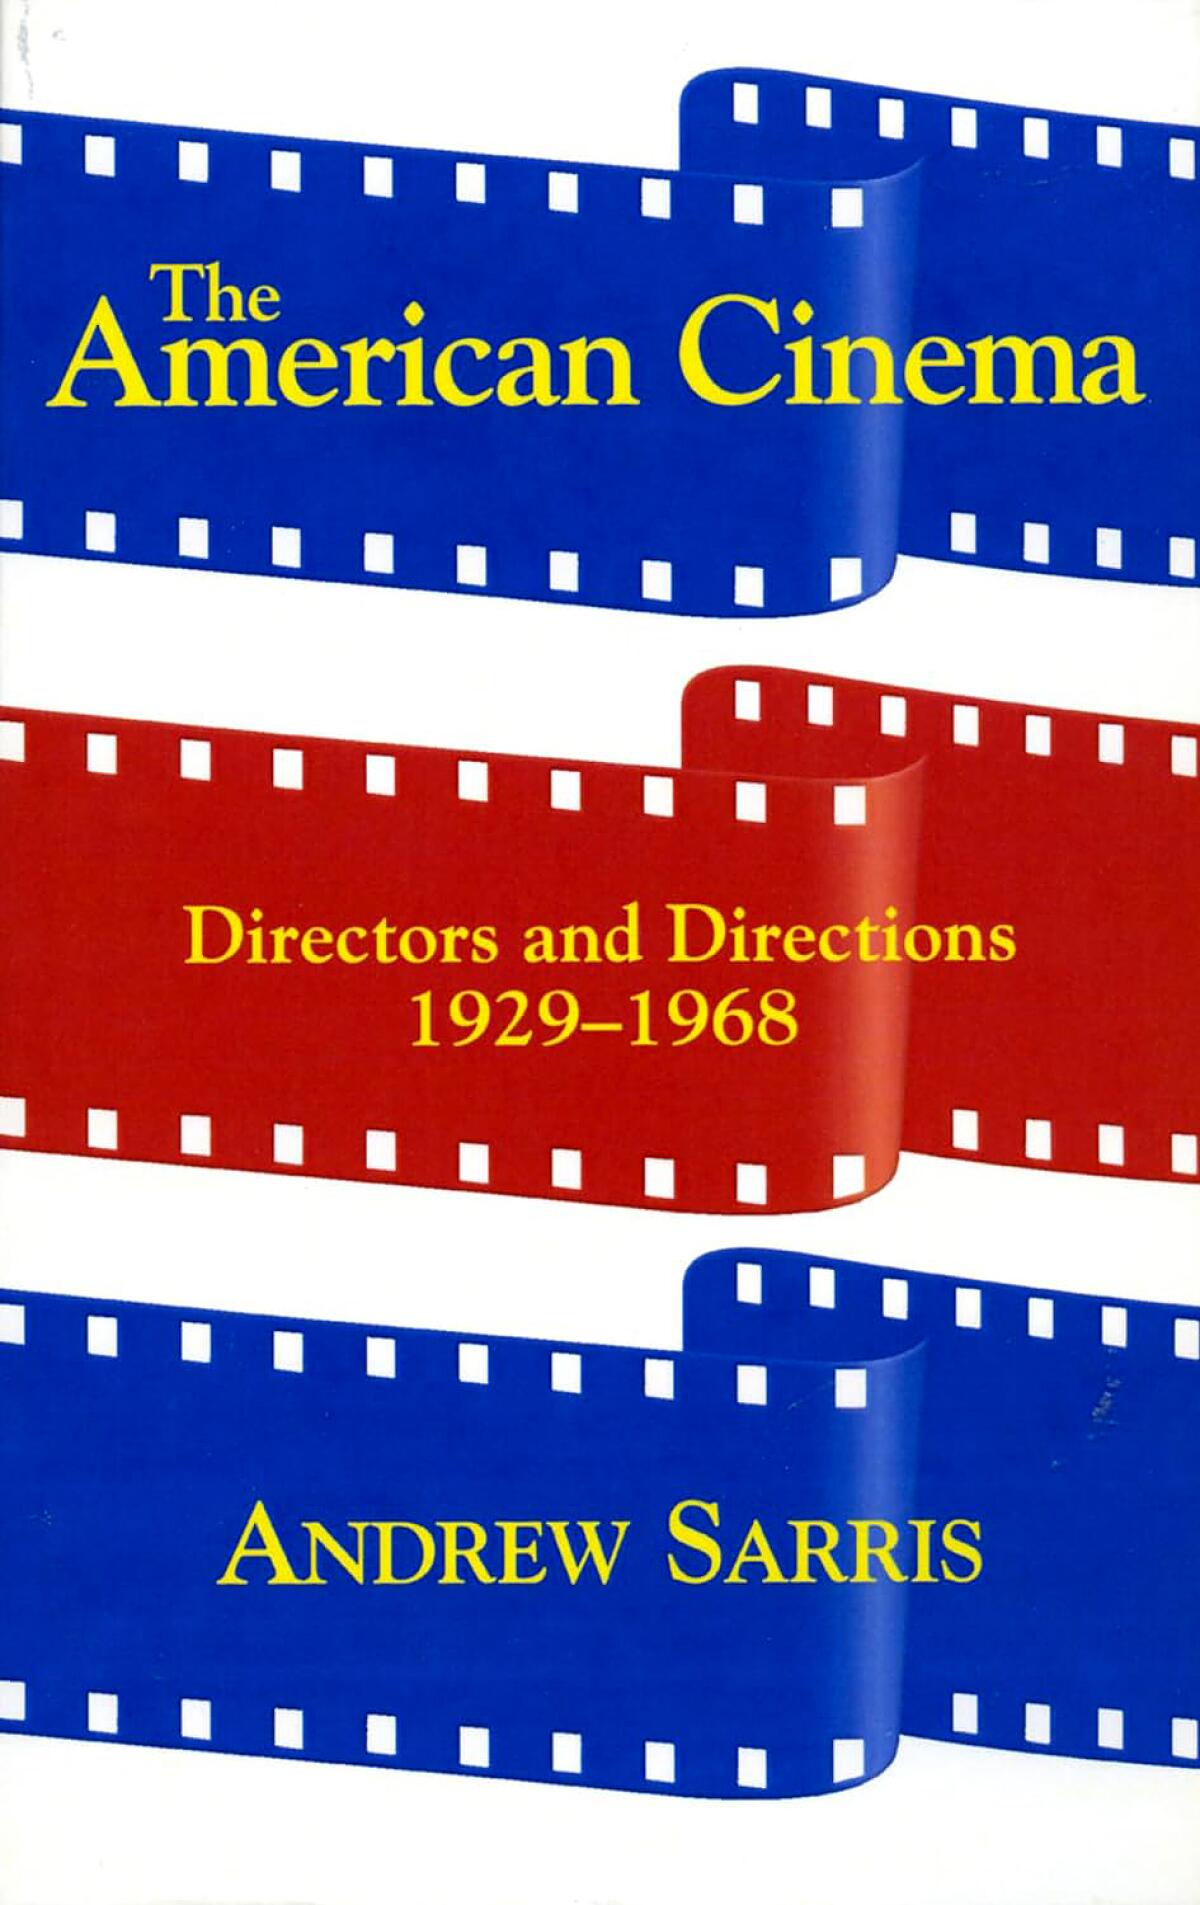 "The American Cinema" by Andrew Sarris, 1968